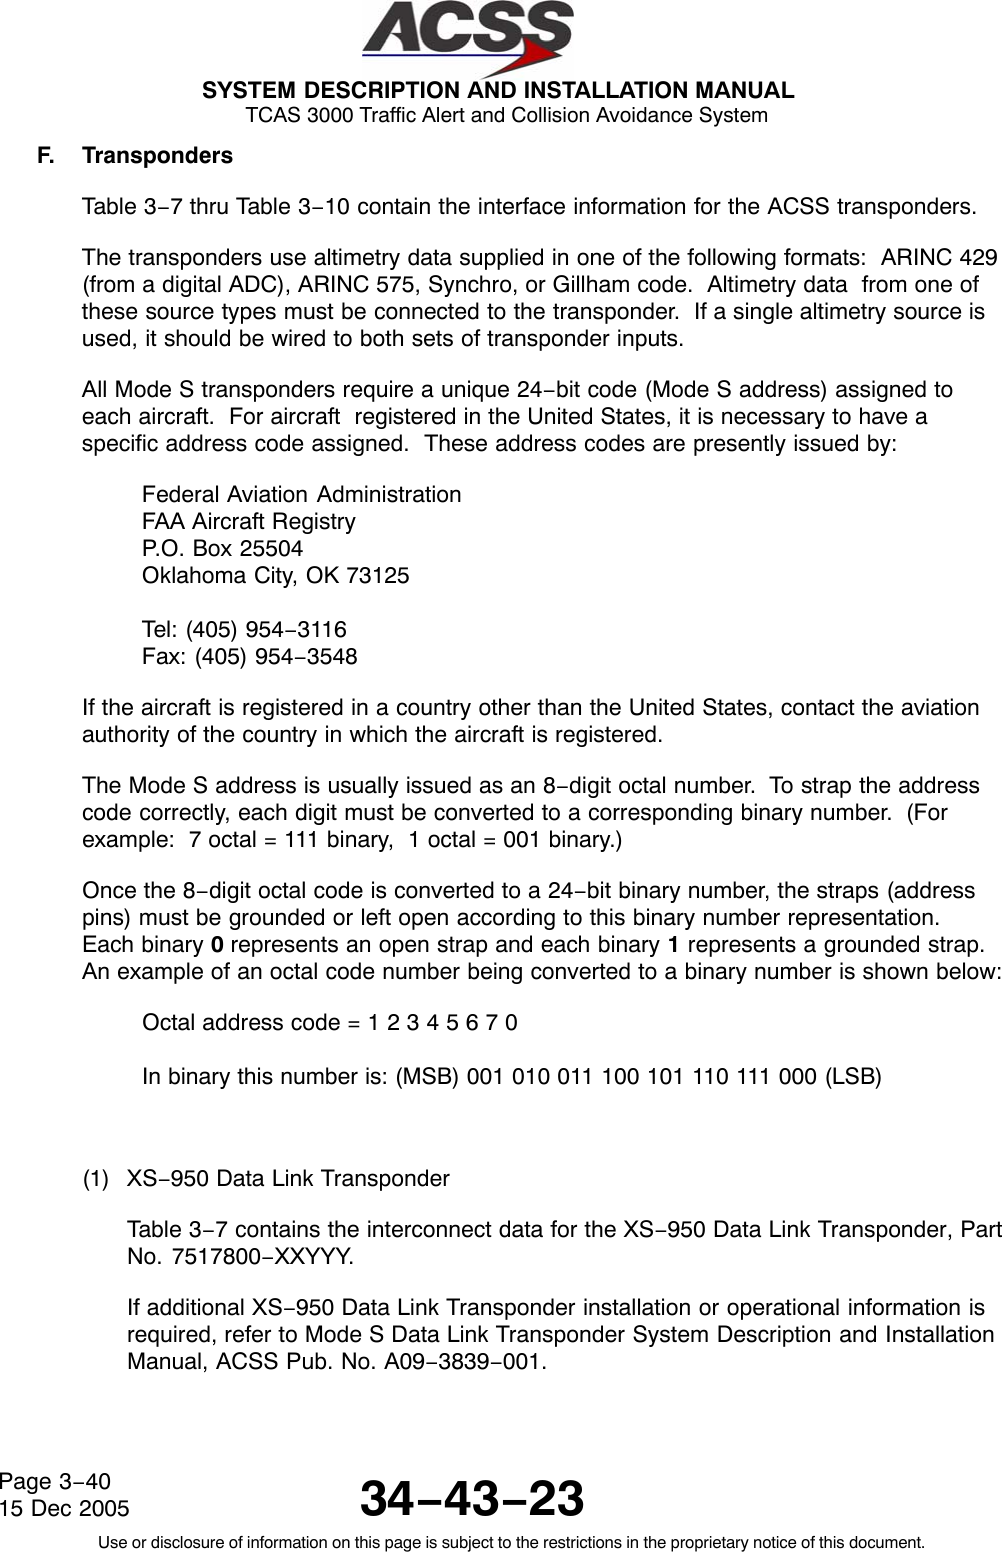  SYSTEM DESCRIPTION AND INSTALLATION MANUAL TCAS 3000 Traffic Alert and Collision Avoidance System34−43−23Use or disclosure of information on this page is subject to the restrictions in the proprietary notice of this document.Page 3−4015 Dec 2005F. TranspondersTable 3−7 thru Table 3−10 contain the interface information for the ACSS transponders.The transponders use altimetry data supplied in one of the following formats:  ARINC 429(from a digital ADC), ARINC 575, Synchro, or Gillham code.  Altimetry data  from one ofthese source types must be connected to the transponder.  If a single altimetry source isused, it should be wired to both sets of transponder inputs.All Mode S transponders require a unique 24−bit code (Mode S address) assigned toeach aircraft.  For aircraft  registered in the United States, it is necessary to have aspecific address code assigned.  These address codes are presently issued by:Federal Aviation AdministrationFAA Aircraft RegistryP.O. Box 25504Oklahoma City, OK 73125Tel: (405) 954−3116Fax: (405) 954−3548If the aircraft is registered in a country other than the United States, contact the aviationauthority of the country in which the aircraft is registered.The Mode S address is usually issued as an 8−digit octal number.  To strap the addresscode correctly, each digit must be converted to a corresponding binary number.  (Forexample:  7 octal = 111 binary,  1 octal = 001 binary.)Once the 8−digit octal code is converted to a 24−bit binary number, the straps (addresspins) must be grounded or left open according to this binary number representation.Each binary 0 represents an open strap and each binary 1 represents a grounded strap.An example of an octal code number being converted to a binary number is shown below:Octal address code = 1 2 3 4 5 6 7 0In binary this number is: (MSB) 001 010 011 100 101 110 111 000 (LSB)(1) XS−950 Data Link TransponderTable 3−7 contains the interconnect data for the XS−950 Data Link Transponder, PartNo. 7517800−XXYYY.If additional XS−950 Data Link Transponder installation or operational information isrequired, refer to Mode S Data Link Transponder System Description and InstallationManual, ACSS Pub. No. A09−3839−001.